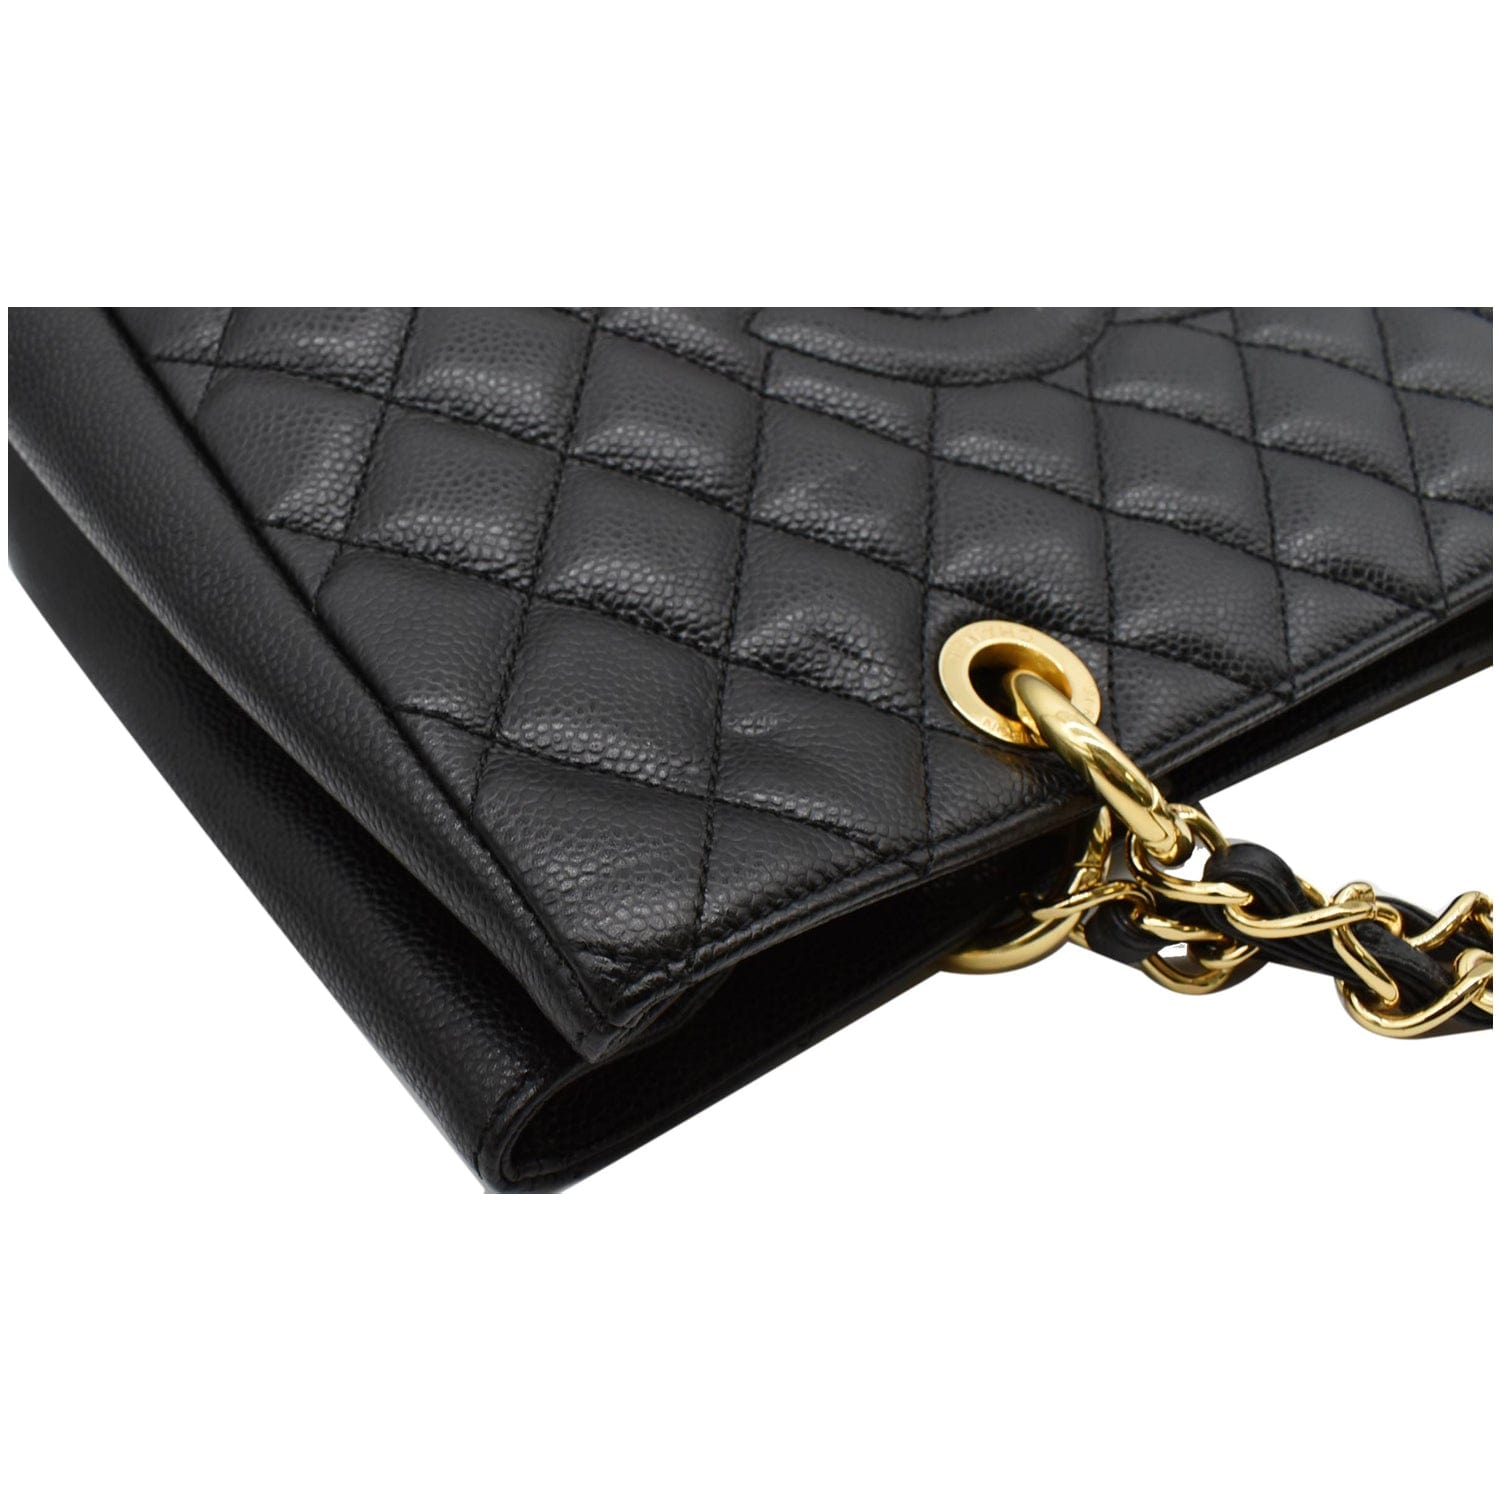 Chanel Caviar Leather GST Grand Shopping Tote Bag